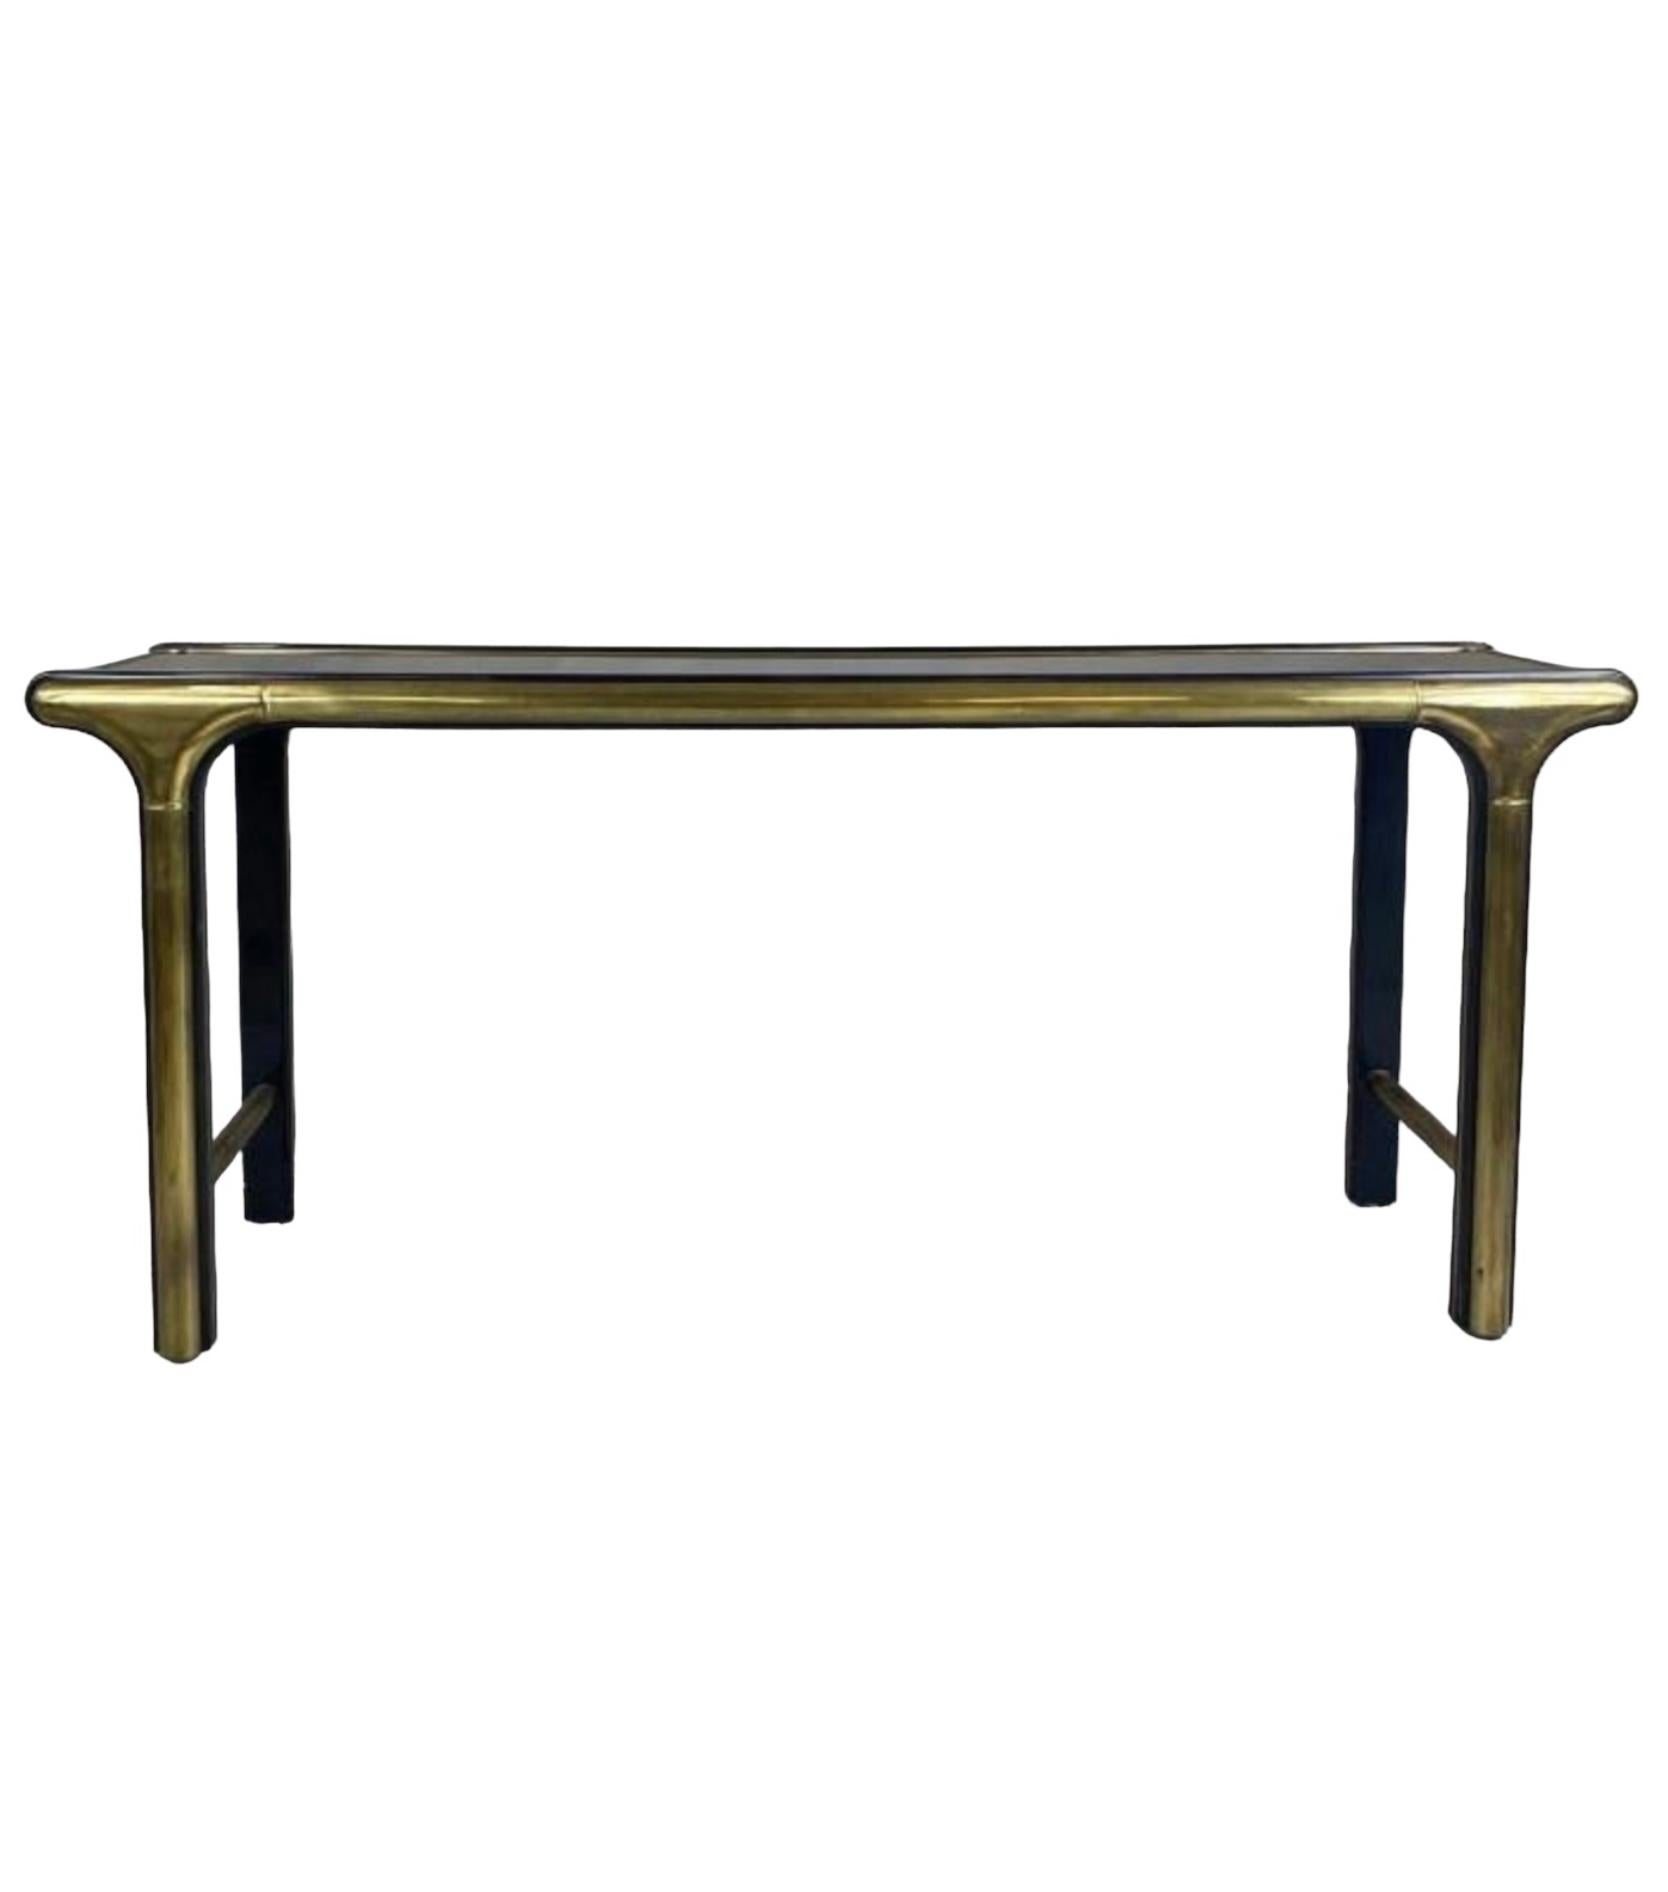 Modern Brass And Lacquer Console Table By William Doezema For Mastercraft In Good Condition For Sale In Kennesaw, GA